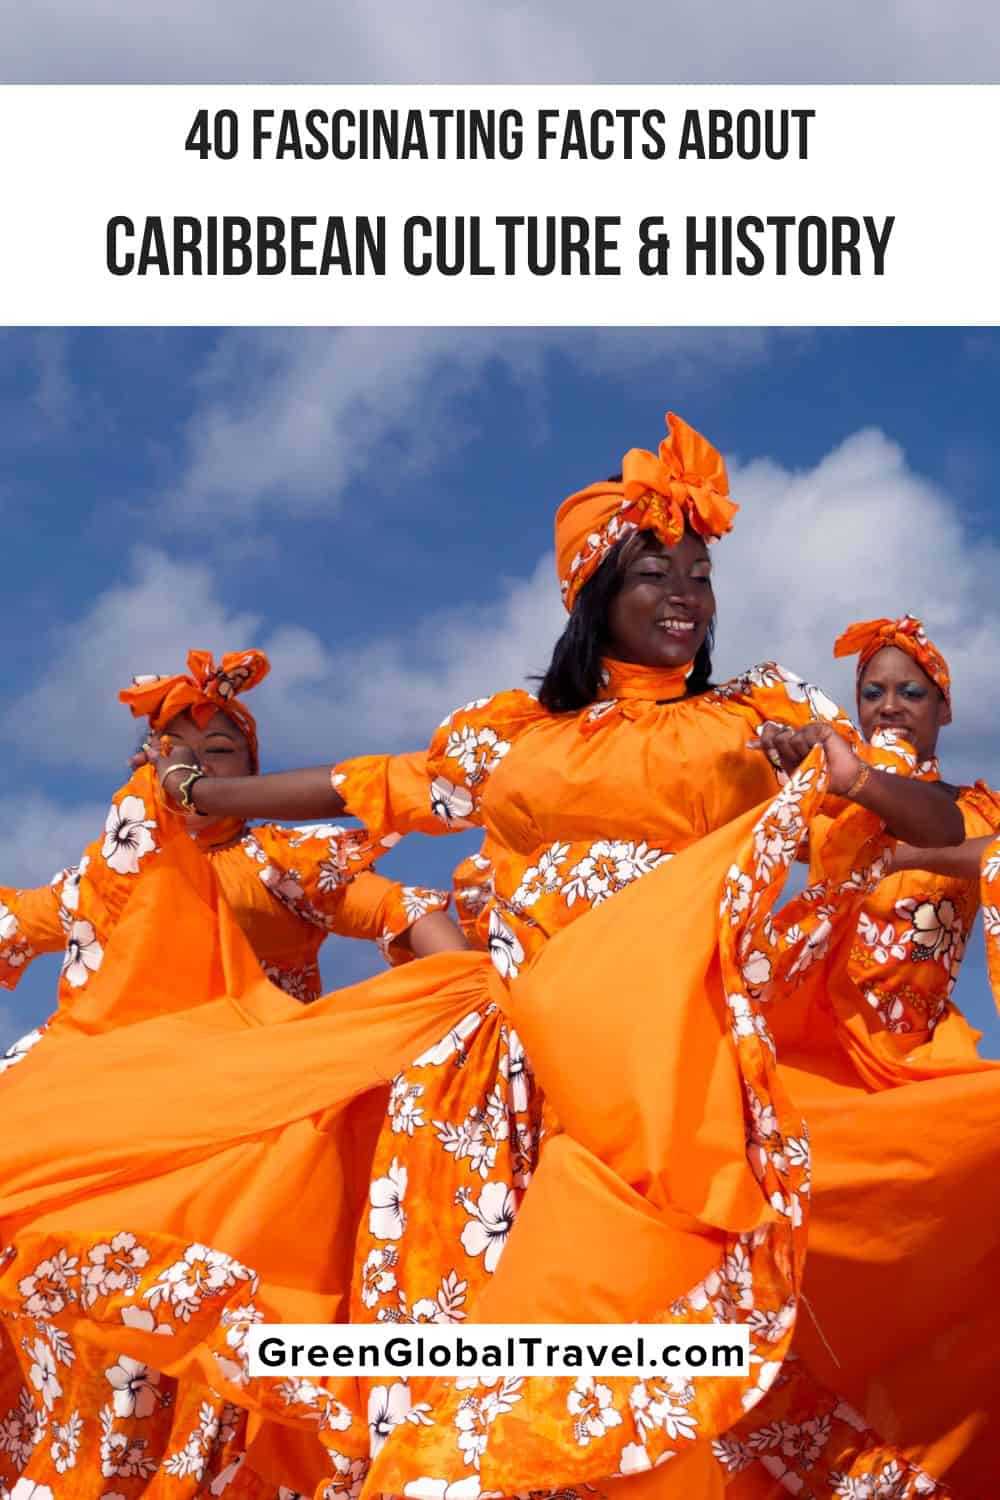 40 Fascinating Facts About Caribbean Culture and History, including the rich cultural traditions that make each of these Caribbean islands unique. | caribbeans culture | culture of caribbean | culture aruba | turks and caicos culture | turks and caicos culture | caribbean culture facts | turks and caicos culture | facts about the caribbean culture | what is caribbean culture